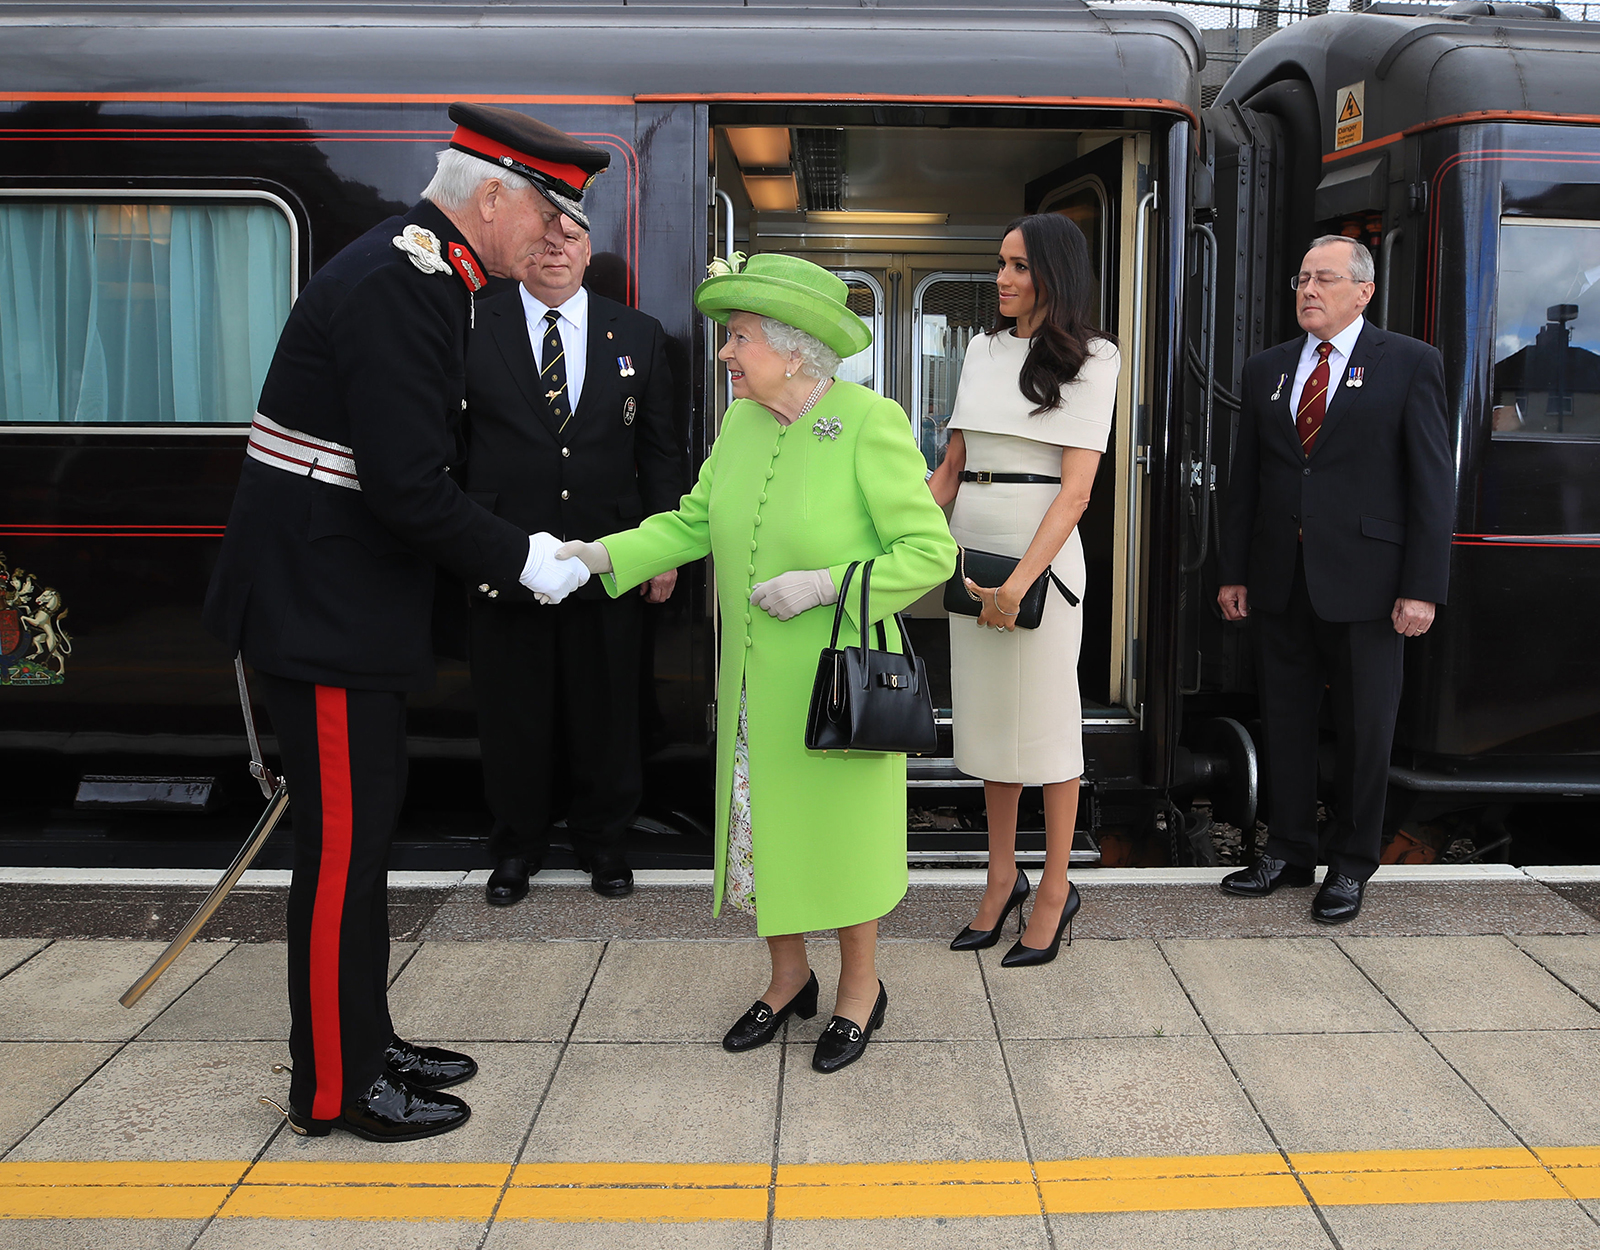 Queen Elizabeth II is greeted with Meghan, Duchess of Sussex as they arrive by Royal Train at Runcorn Station to open the new Mersey Gateway Bridge on June 14, 2018 in the town of Runcorn, Cheshire, England. 